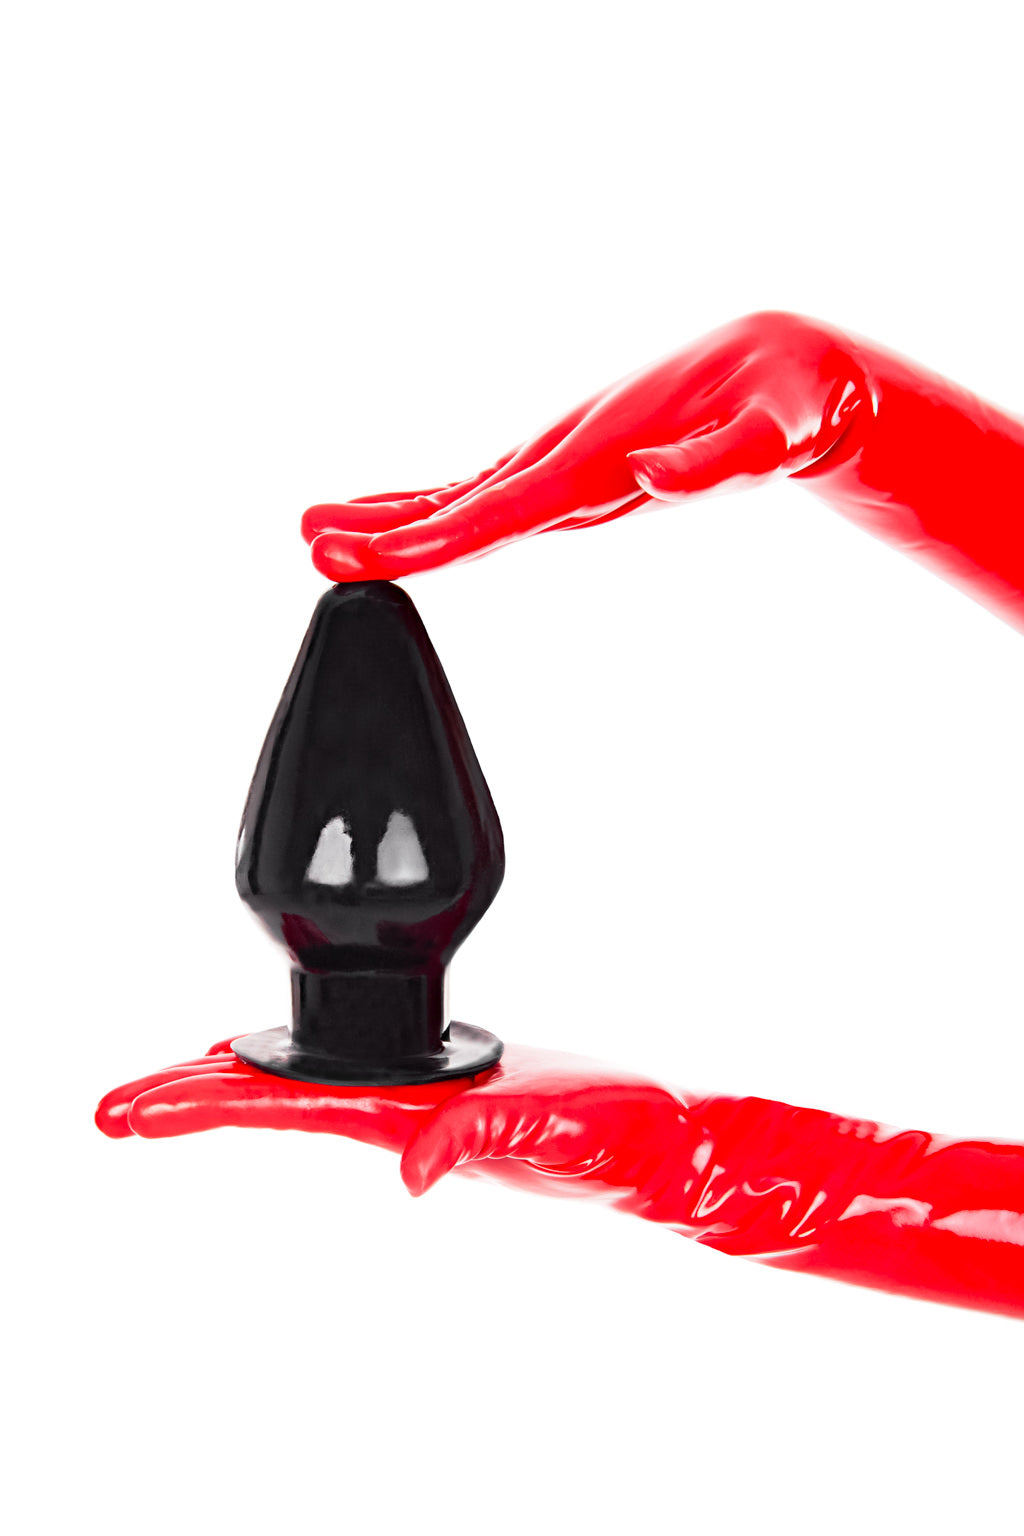 Red latex gloves holding a solid large wide butt plug.